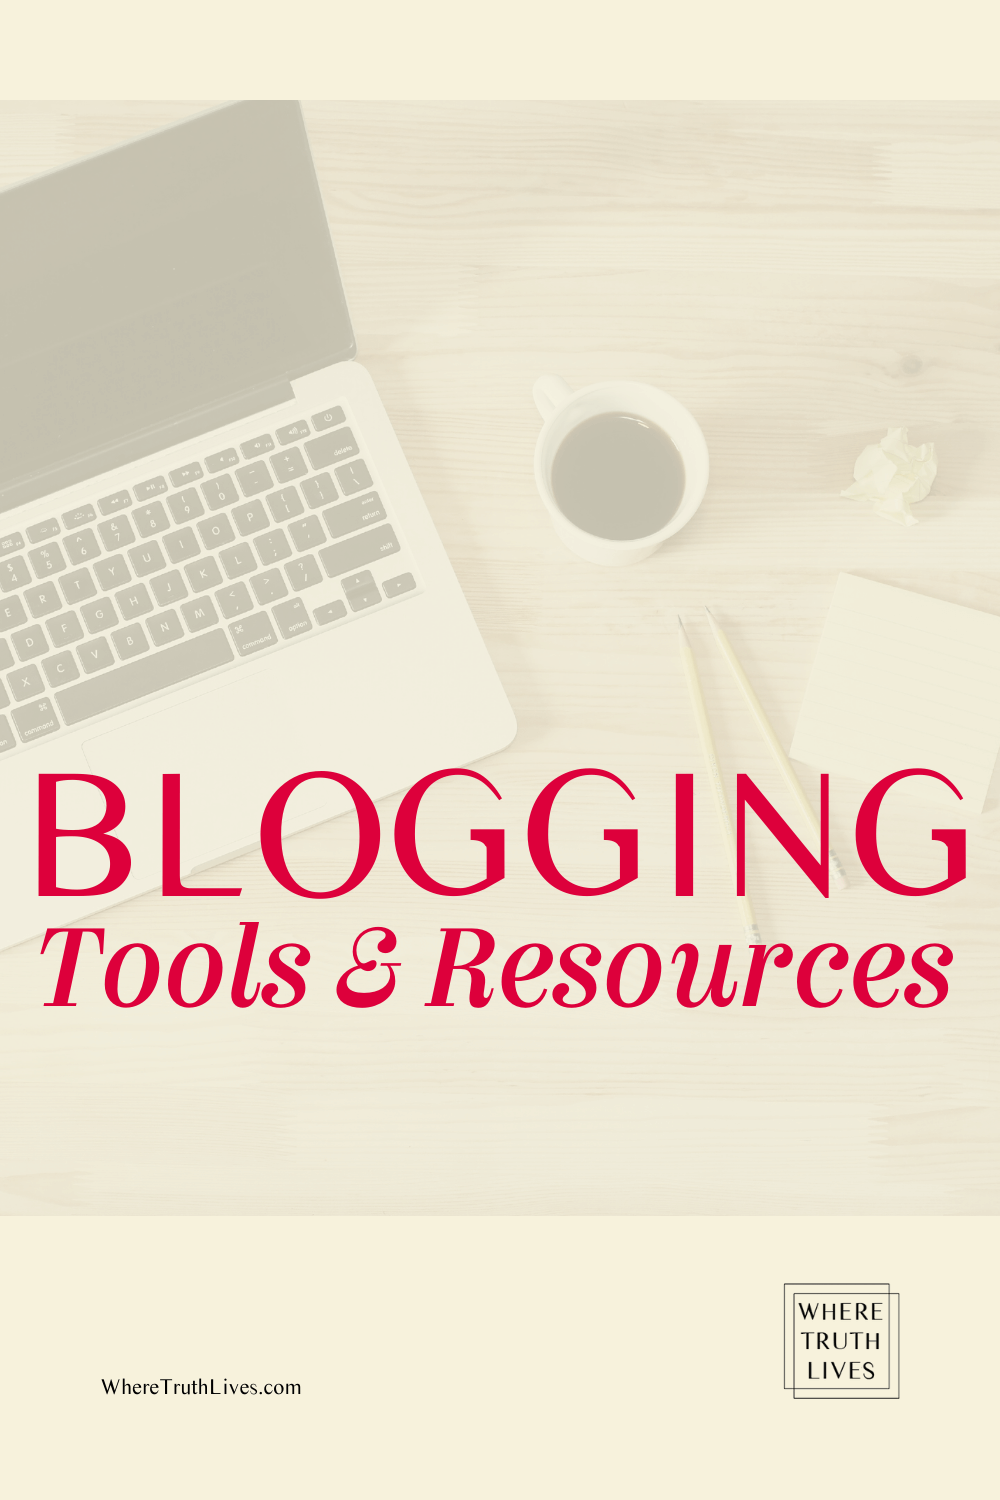 Blogging tools and resources recommended for bloggers of all stages by WhereTruthLives.com